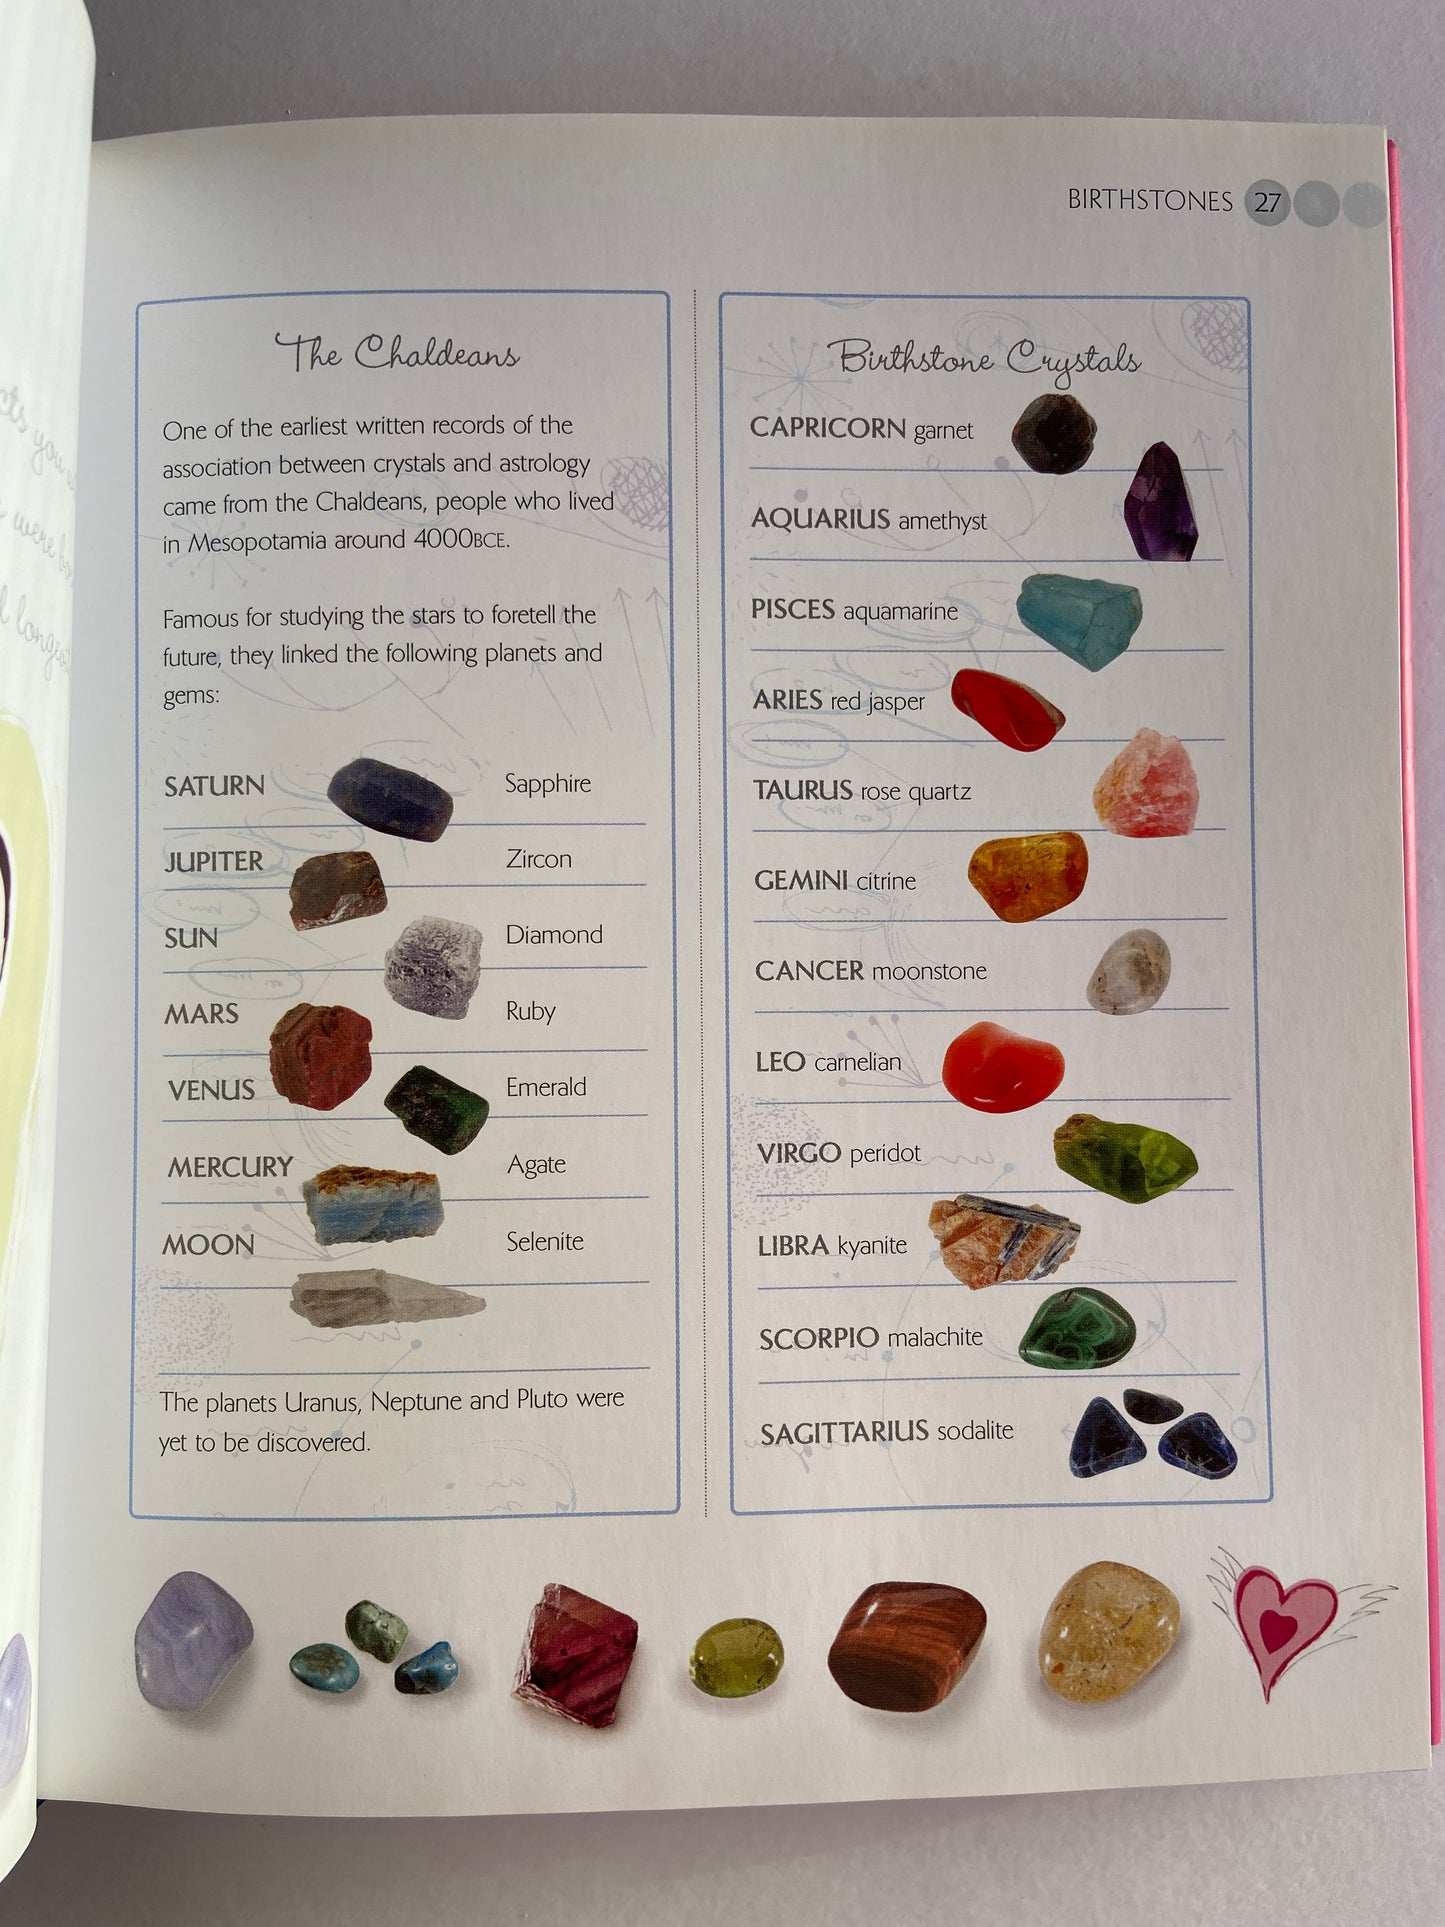 The little book of Crystal Tips & Cures